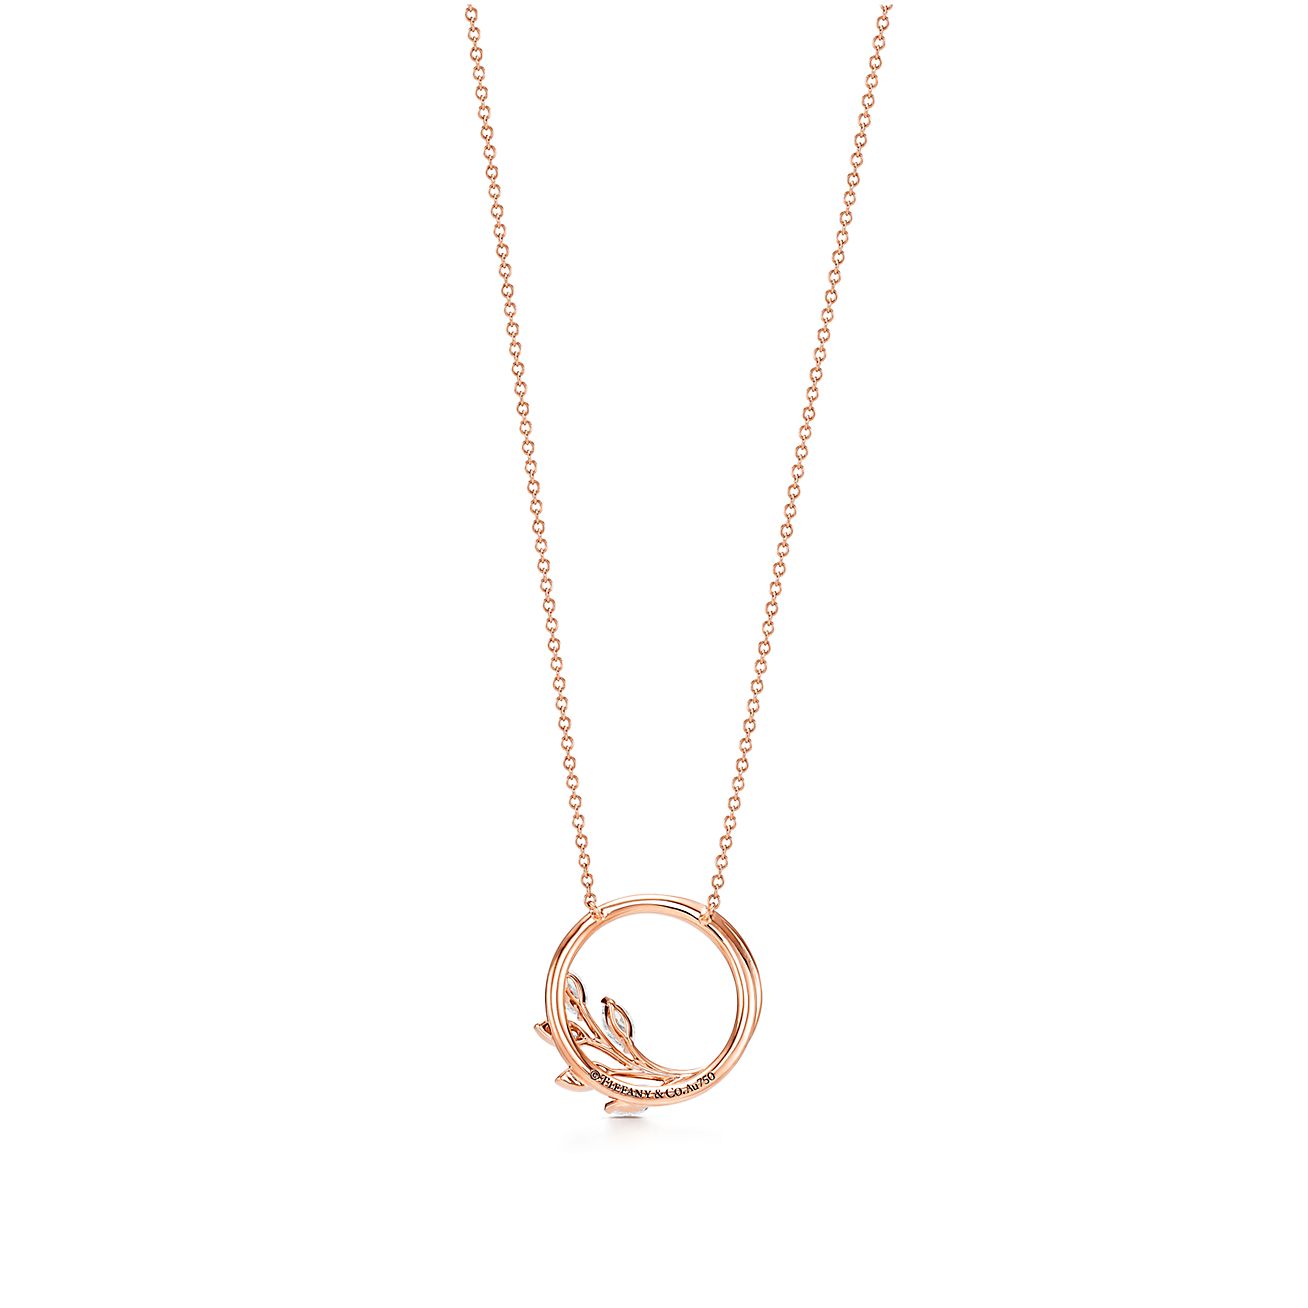 A rose gold necklace with a chain and has a leaves like design in the circles